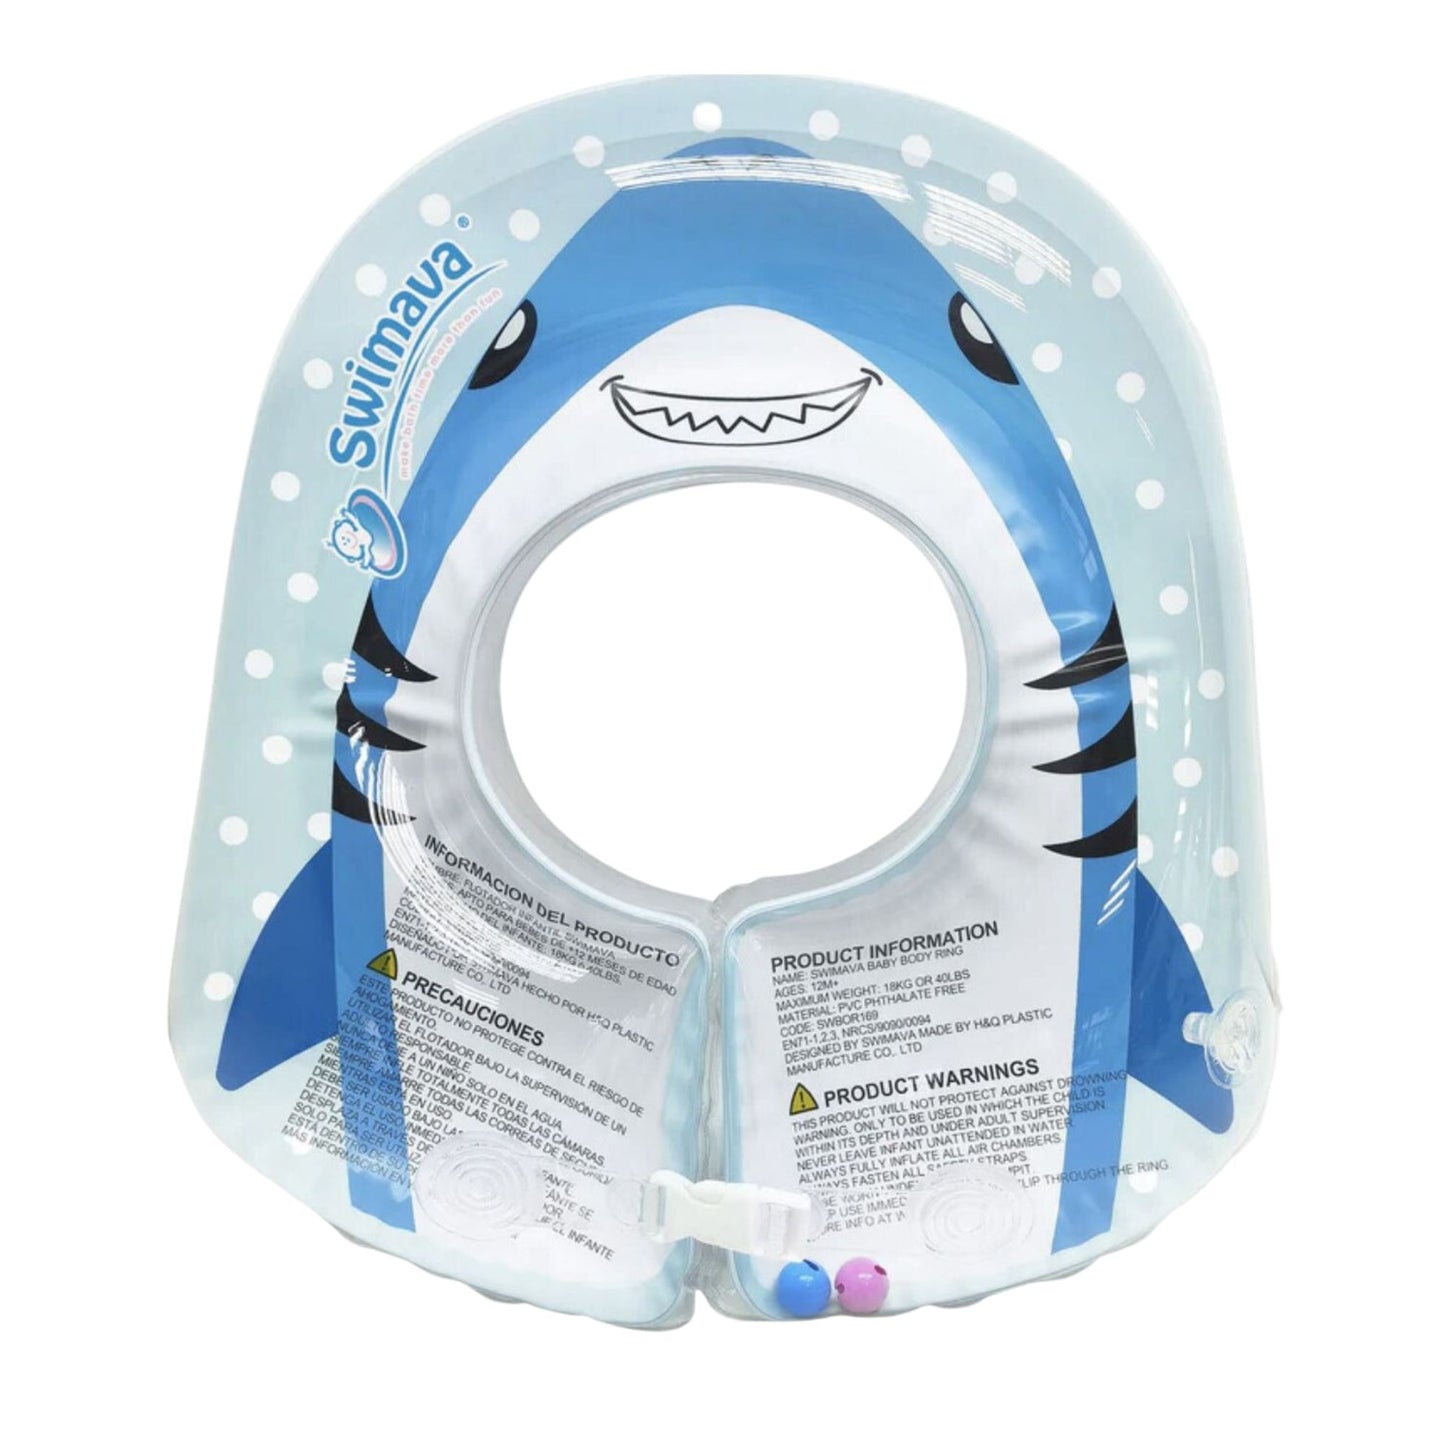 Swimava Body Ring Suitable For Ages 12 Months Up To 18kgs